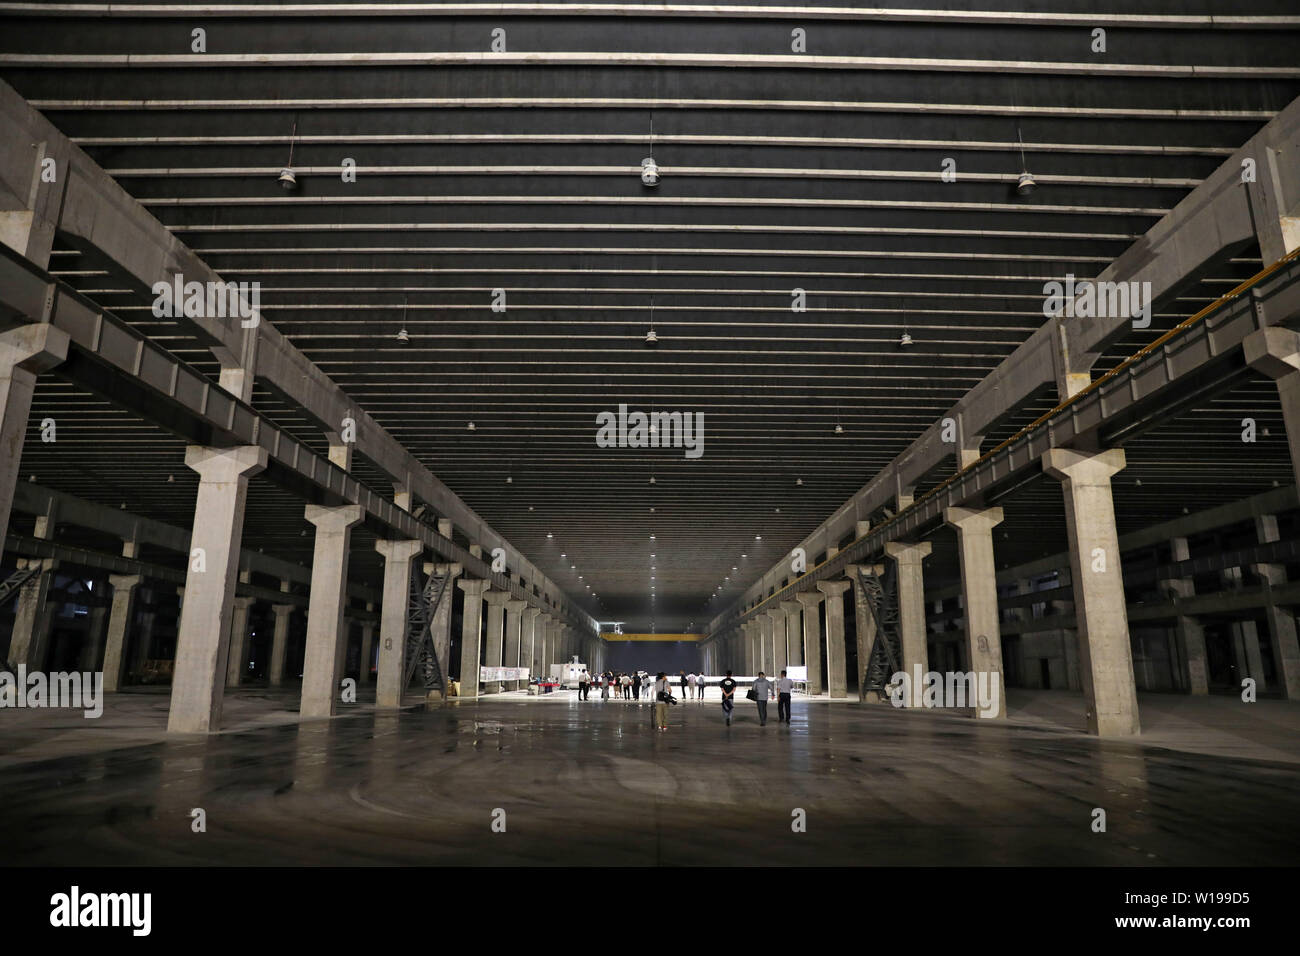 (190701) -- DALIAN, July 1, 2019 (Xinhua) -- Photo taken on June 25, 2019 shows the underground factory of Dalian Gona Technology Group Co., Ltd. in Dalian, northeast China's Liaoning Province. The 2019 Summer Davos Forum is held from July 1-3 in northeast China's coastal city of Dalian. Established by the World Economic Forum in 2007, the forum is held annually in China, alternating between the two port cities of Dalian and Tianjin. Summer Davos helped Dalian reshape the landscape of regional economy and strengthen the port's trade with other markets. Dalian has become an international city a Stock Photo